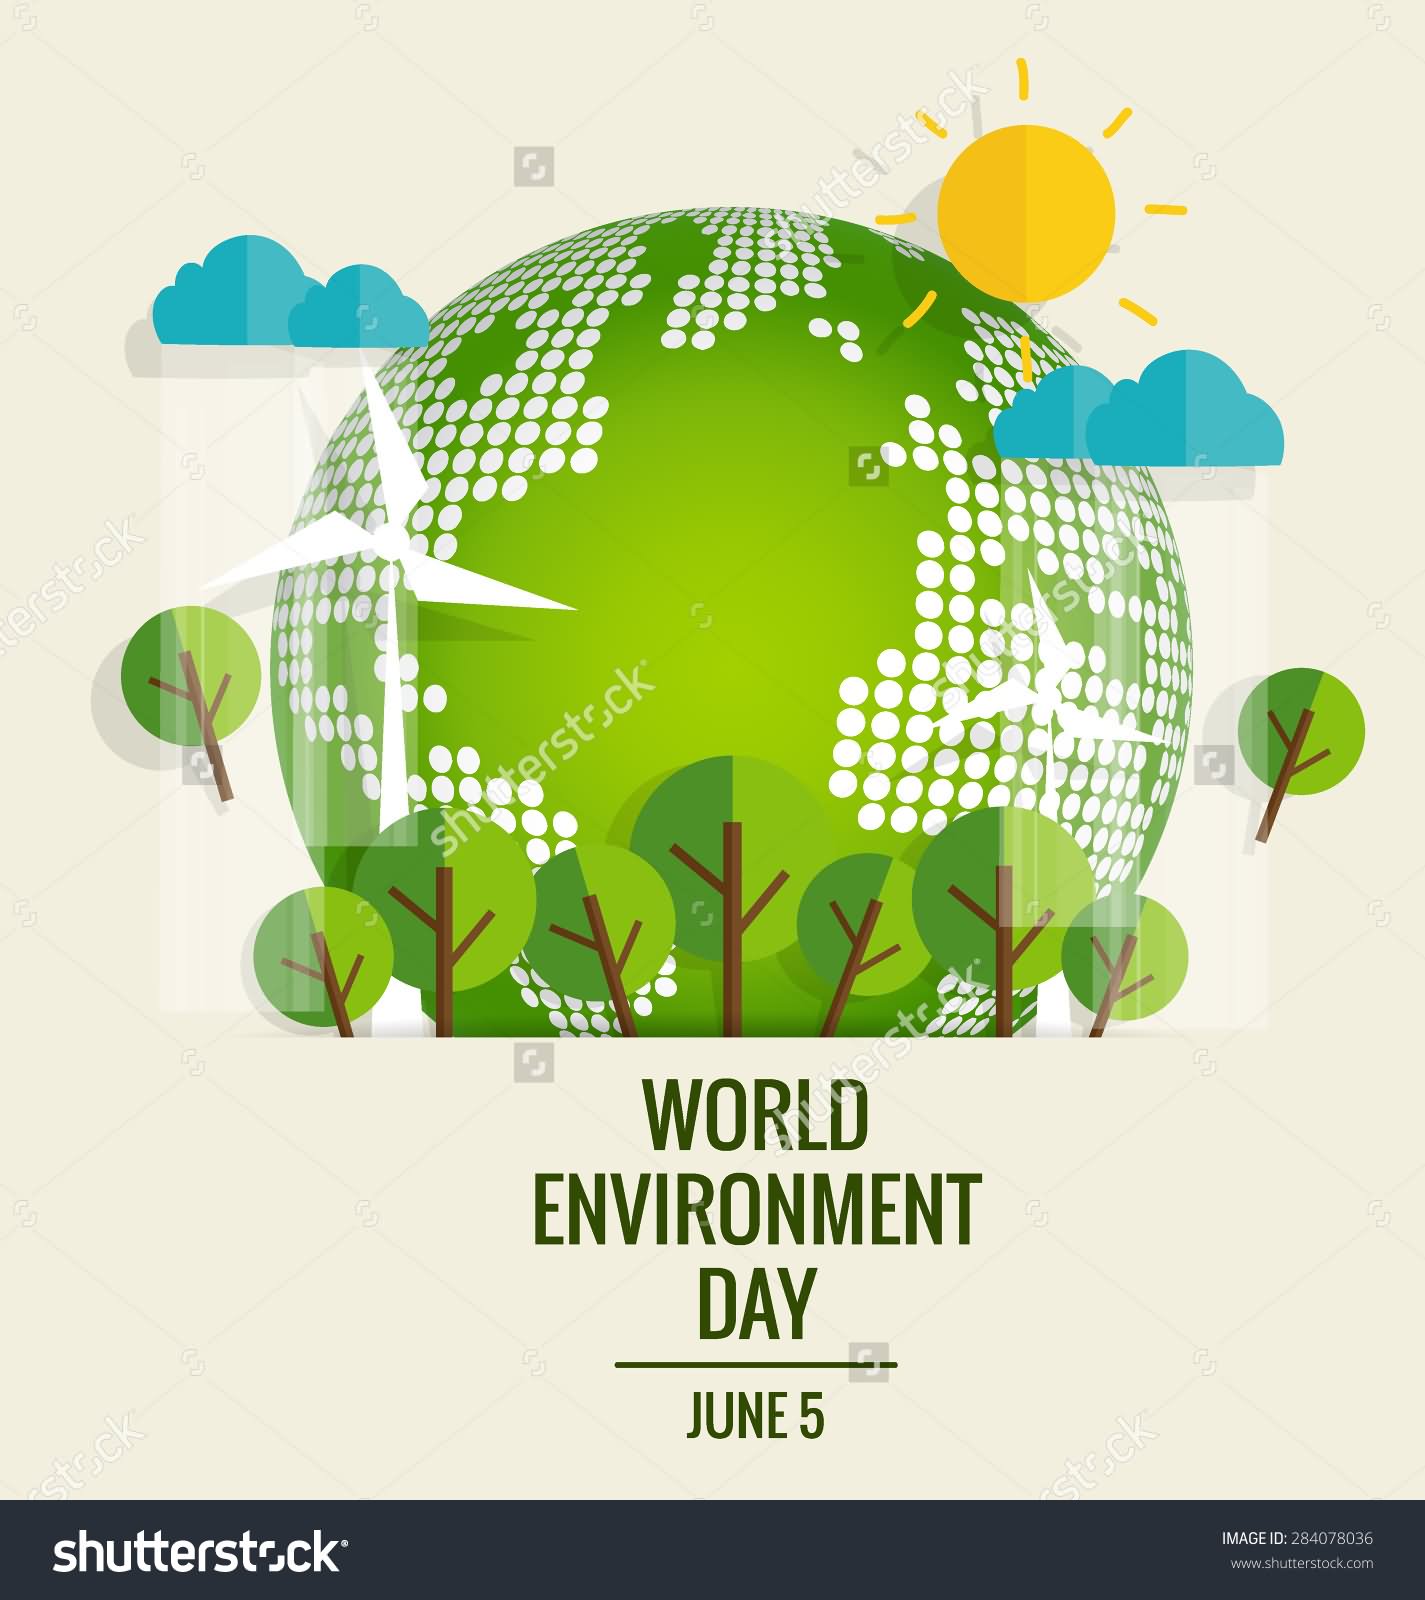 World Environment Day June 5 Picture